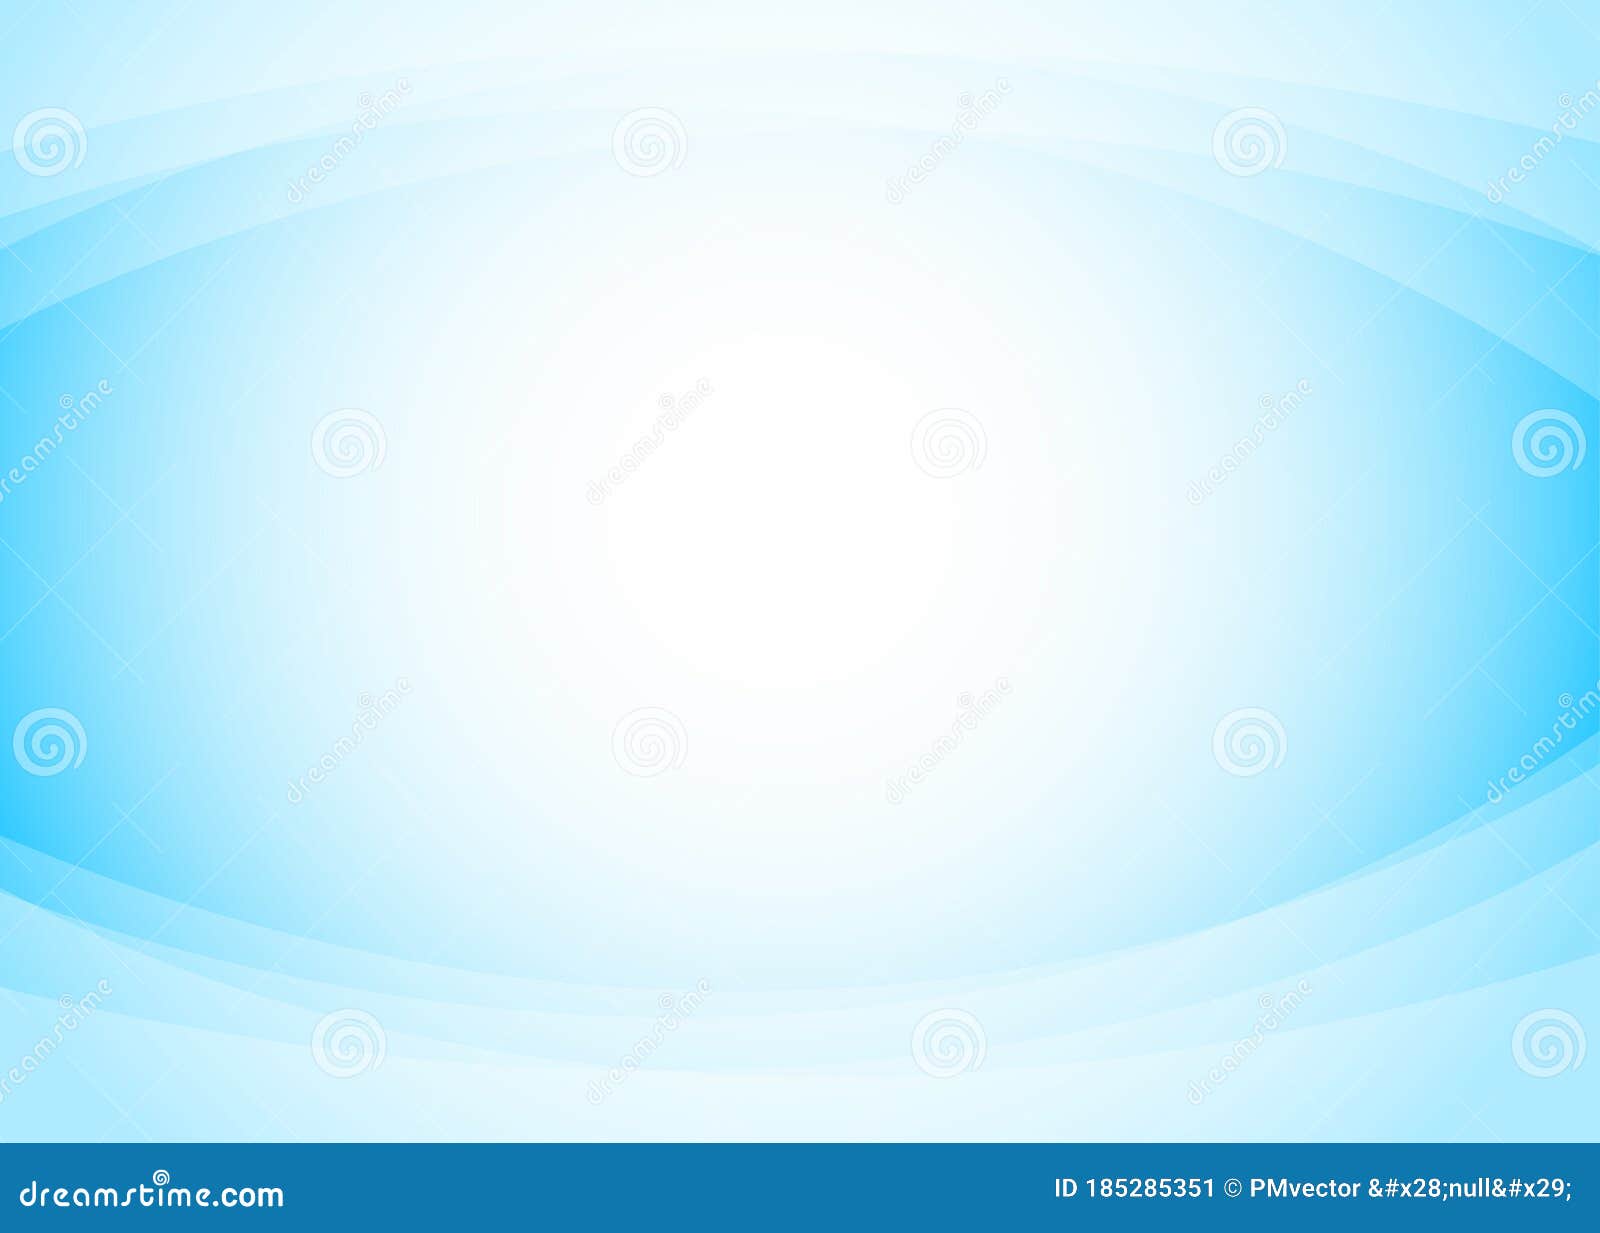 Abstract Lines Curves on Top and Bottom Wavy Light Blue Background Banner  Design Stock Vector - Illustration of bright, curve: 185285351